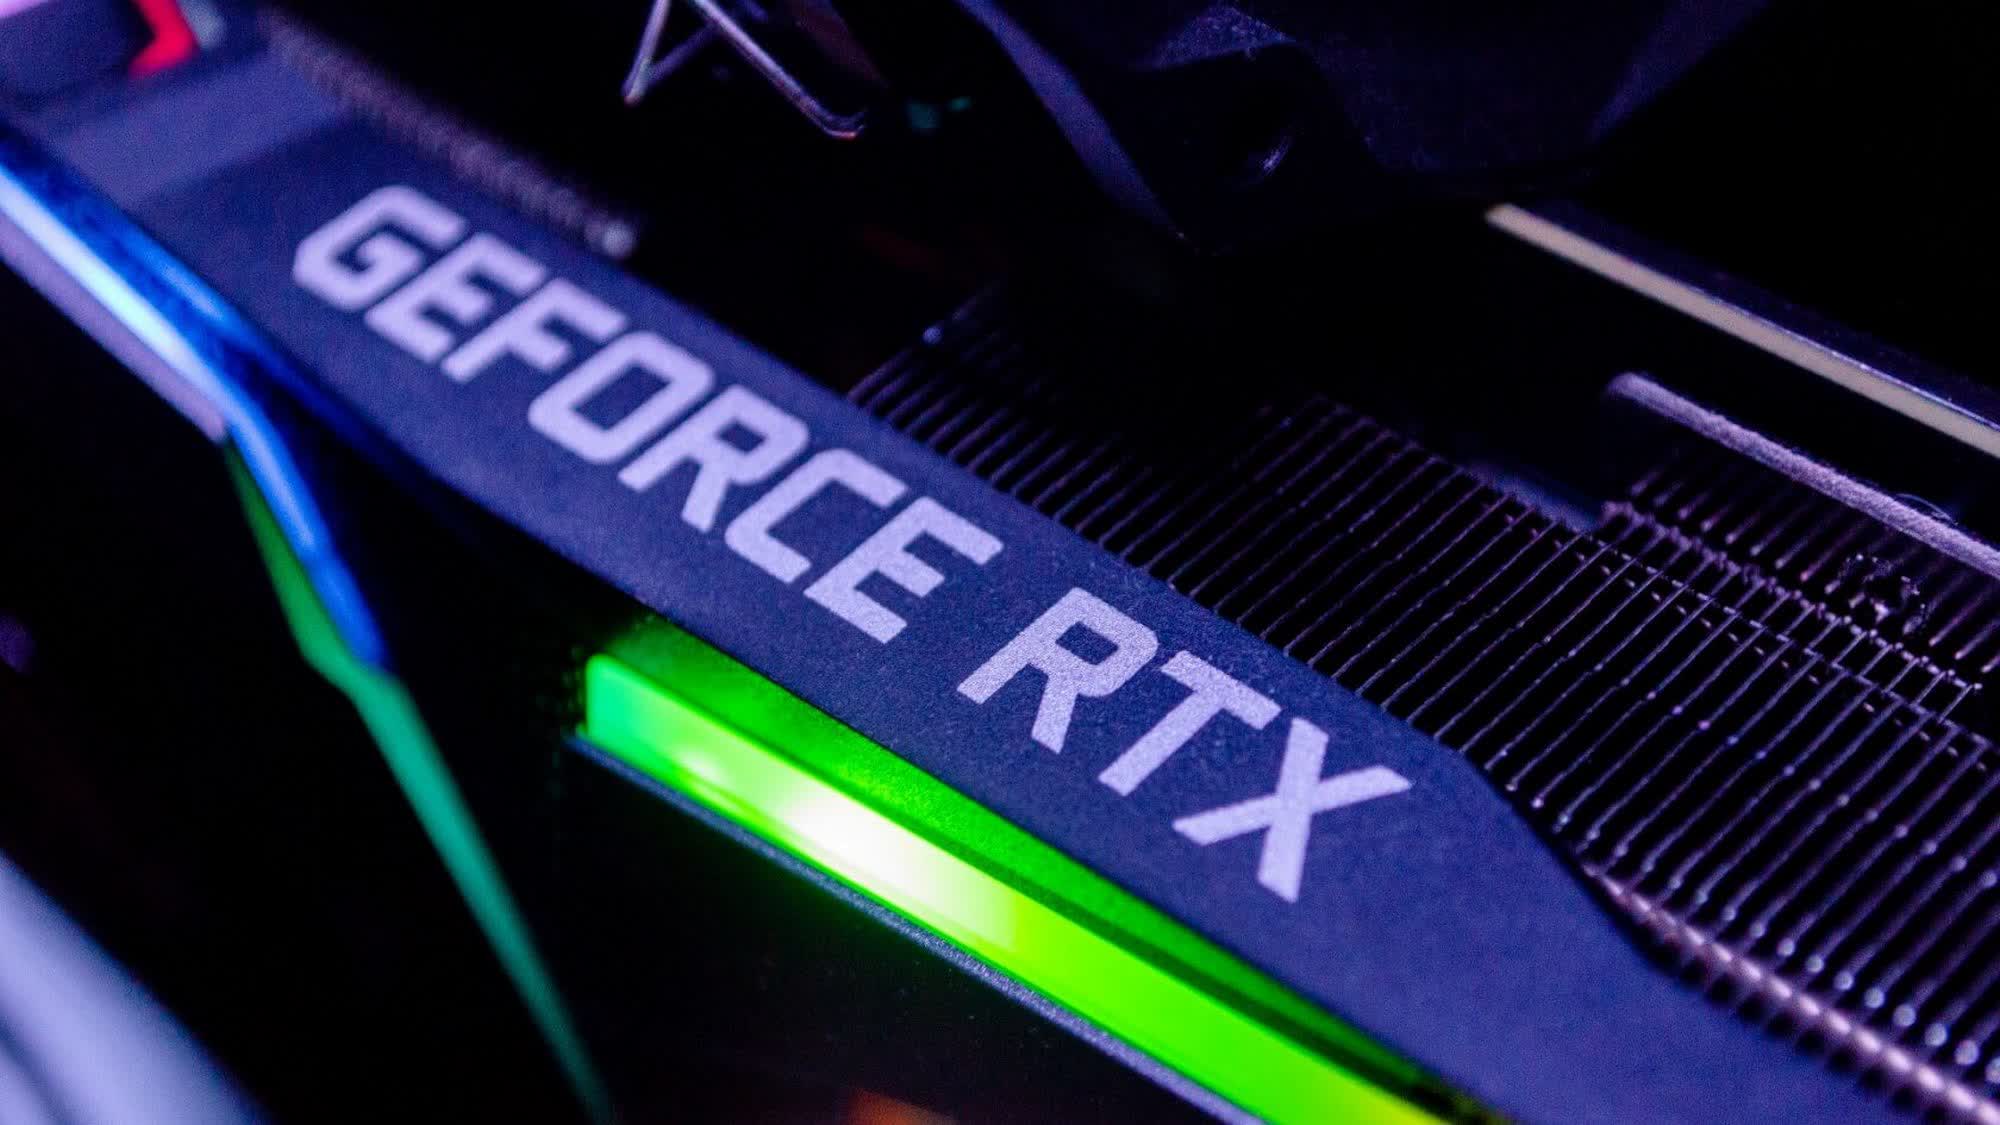 Nvidia roadmap shows GeForce RTX 5000 cards set for 2025 launch